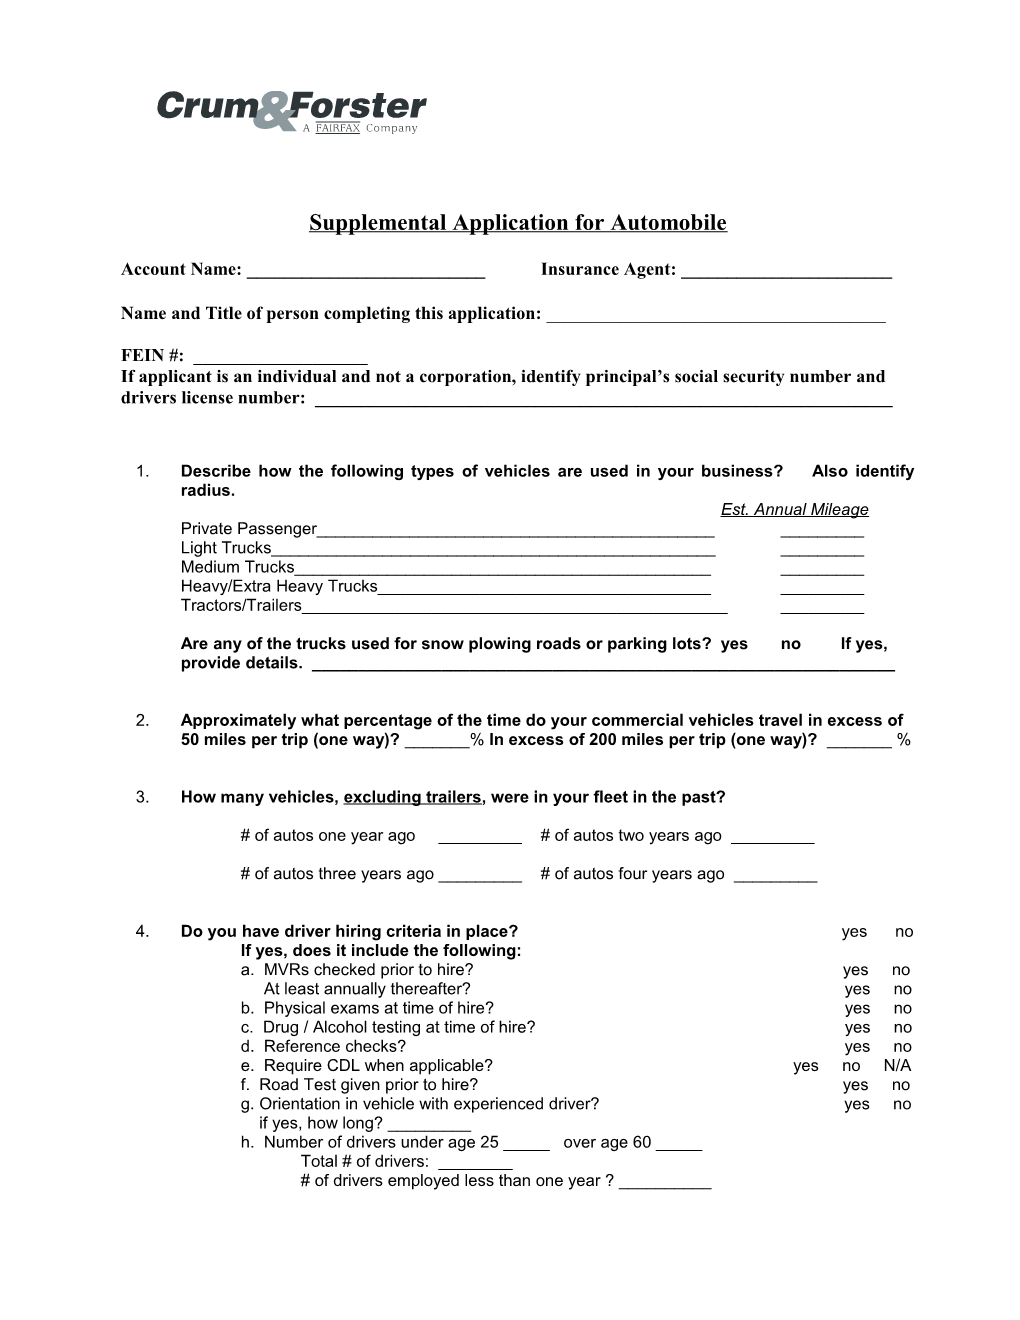 Supplemental Application for Automobile